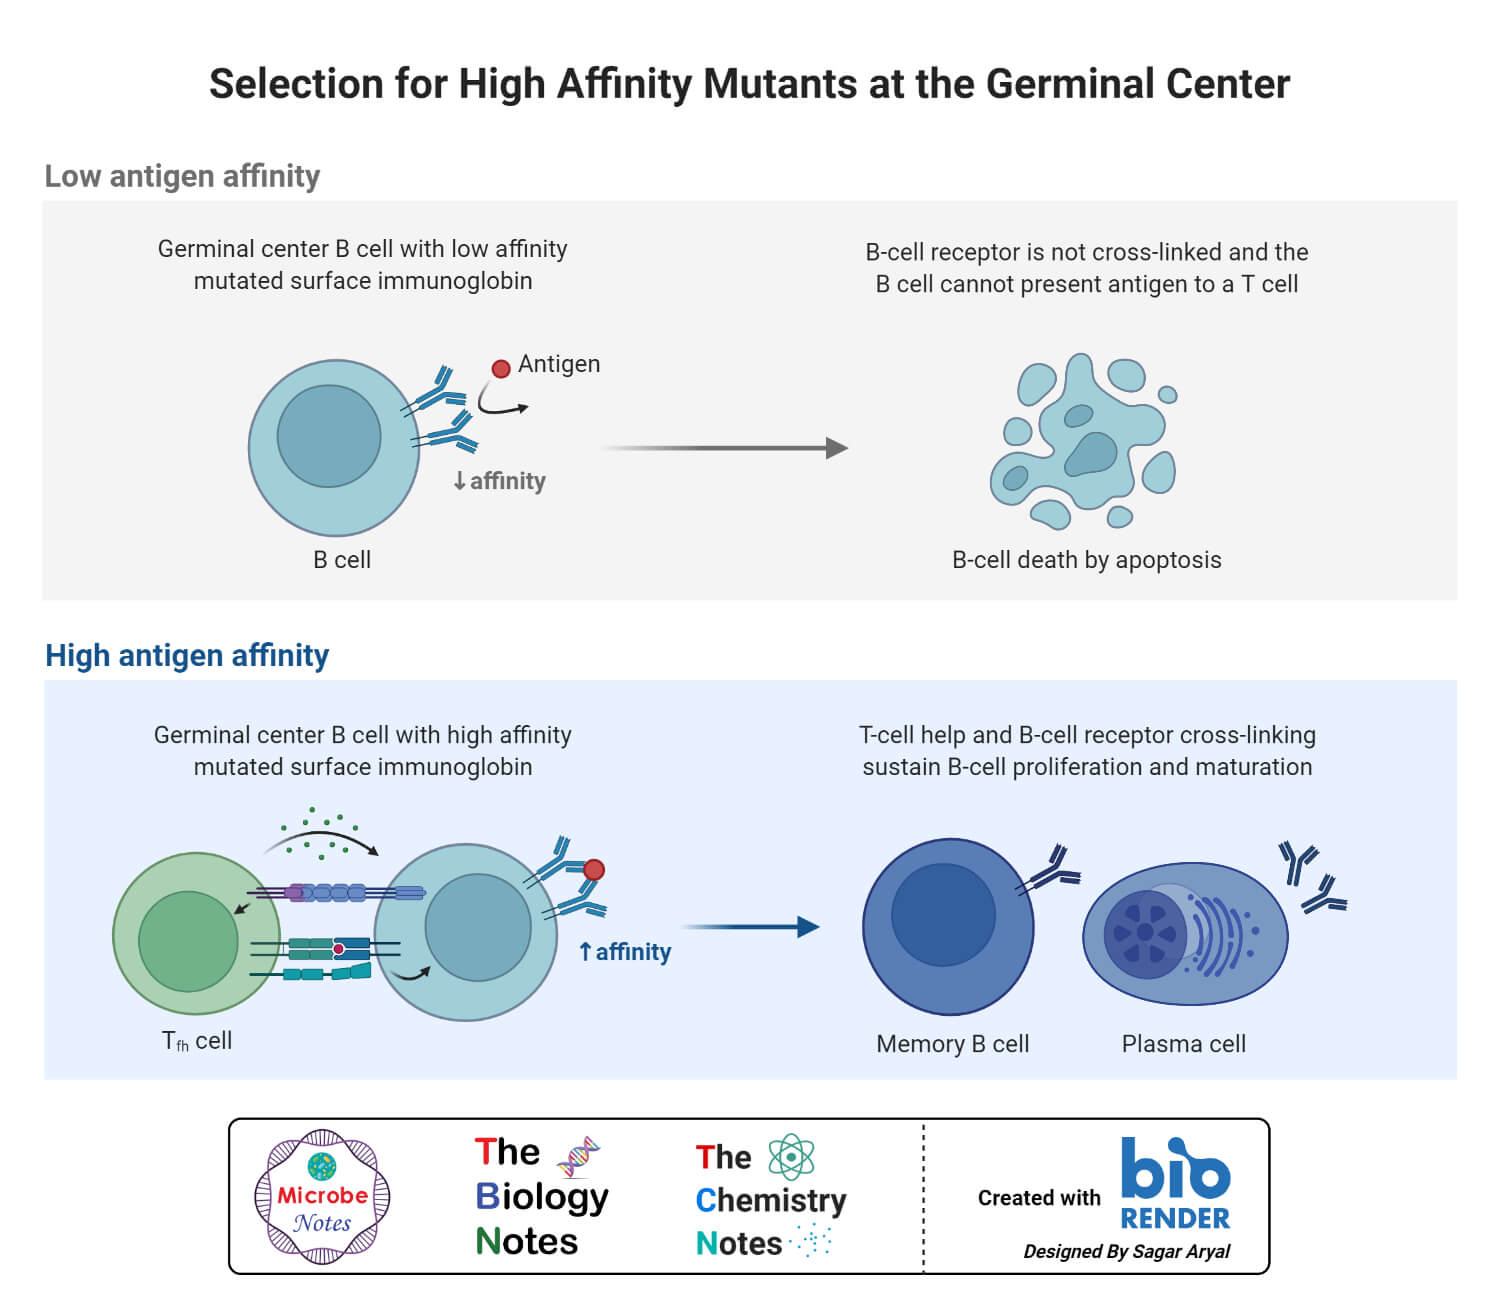 Selection for High Affinity Mutants at the Germinal Center